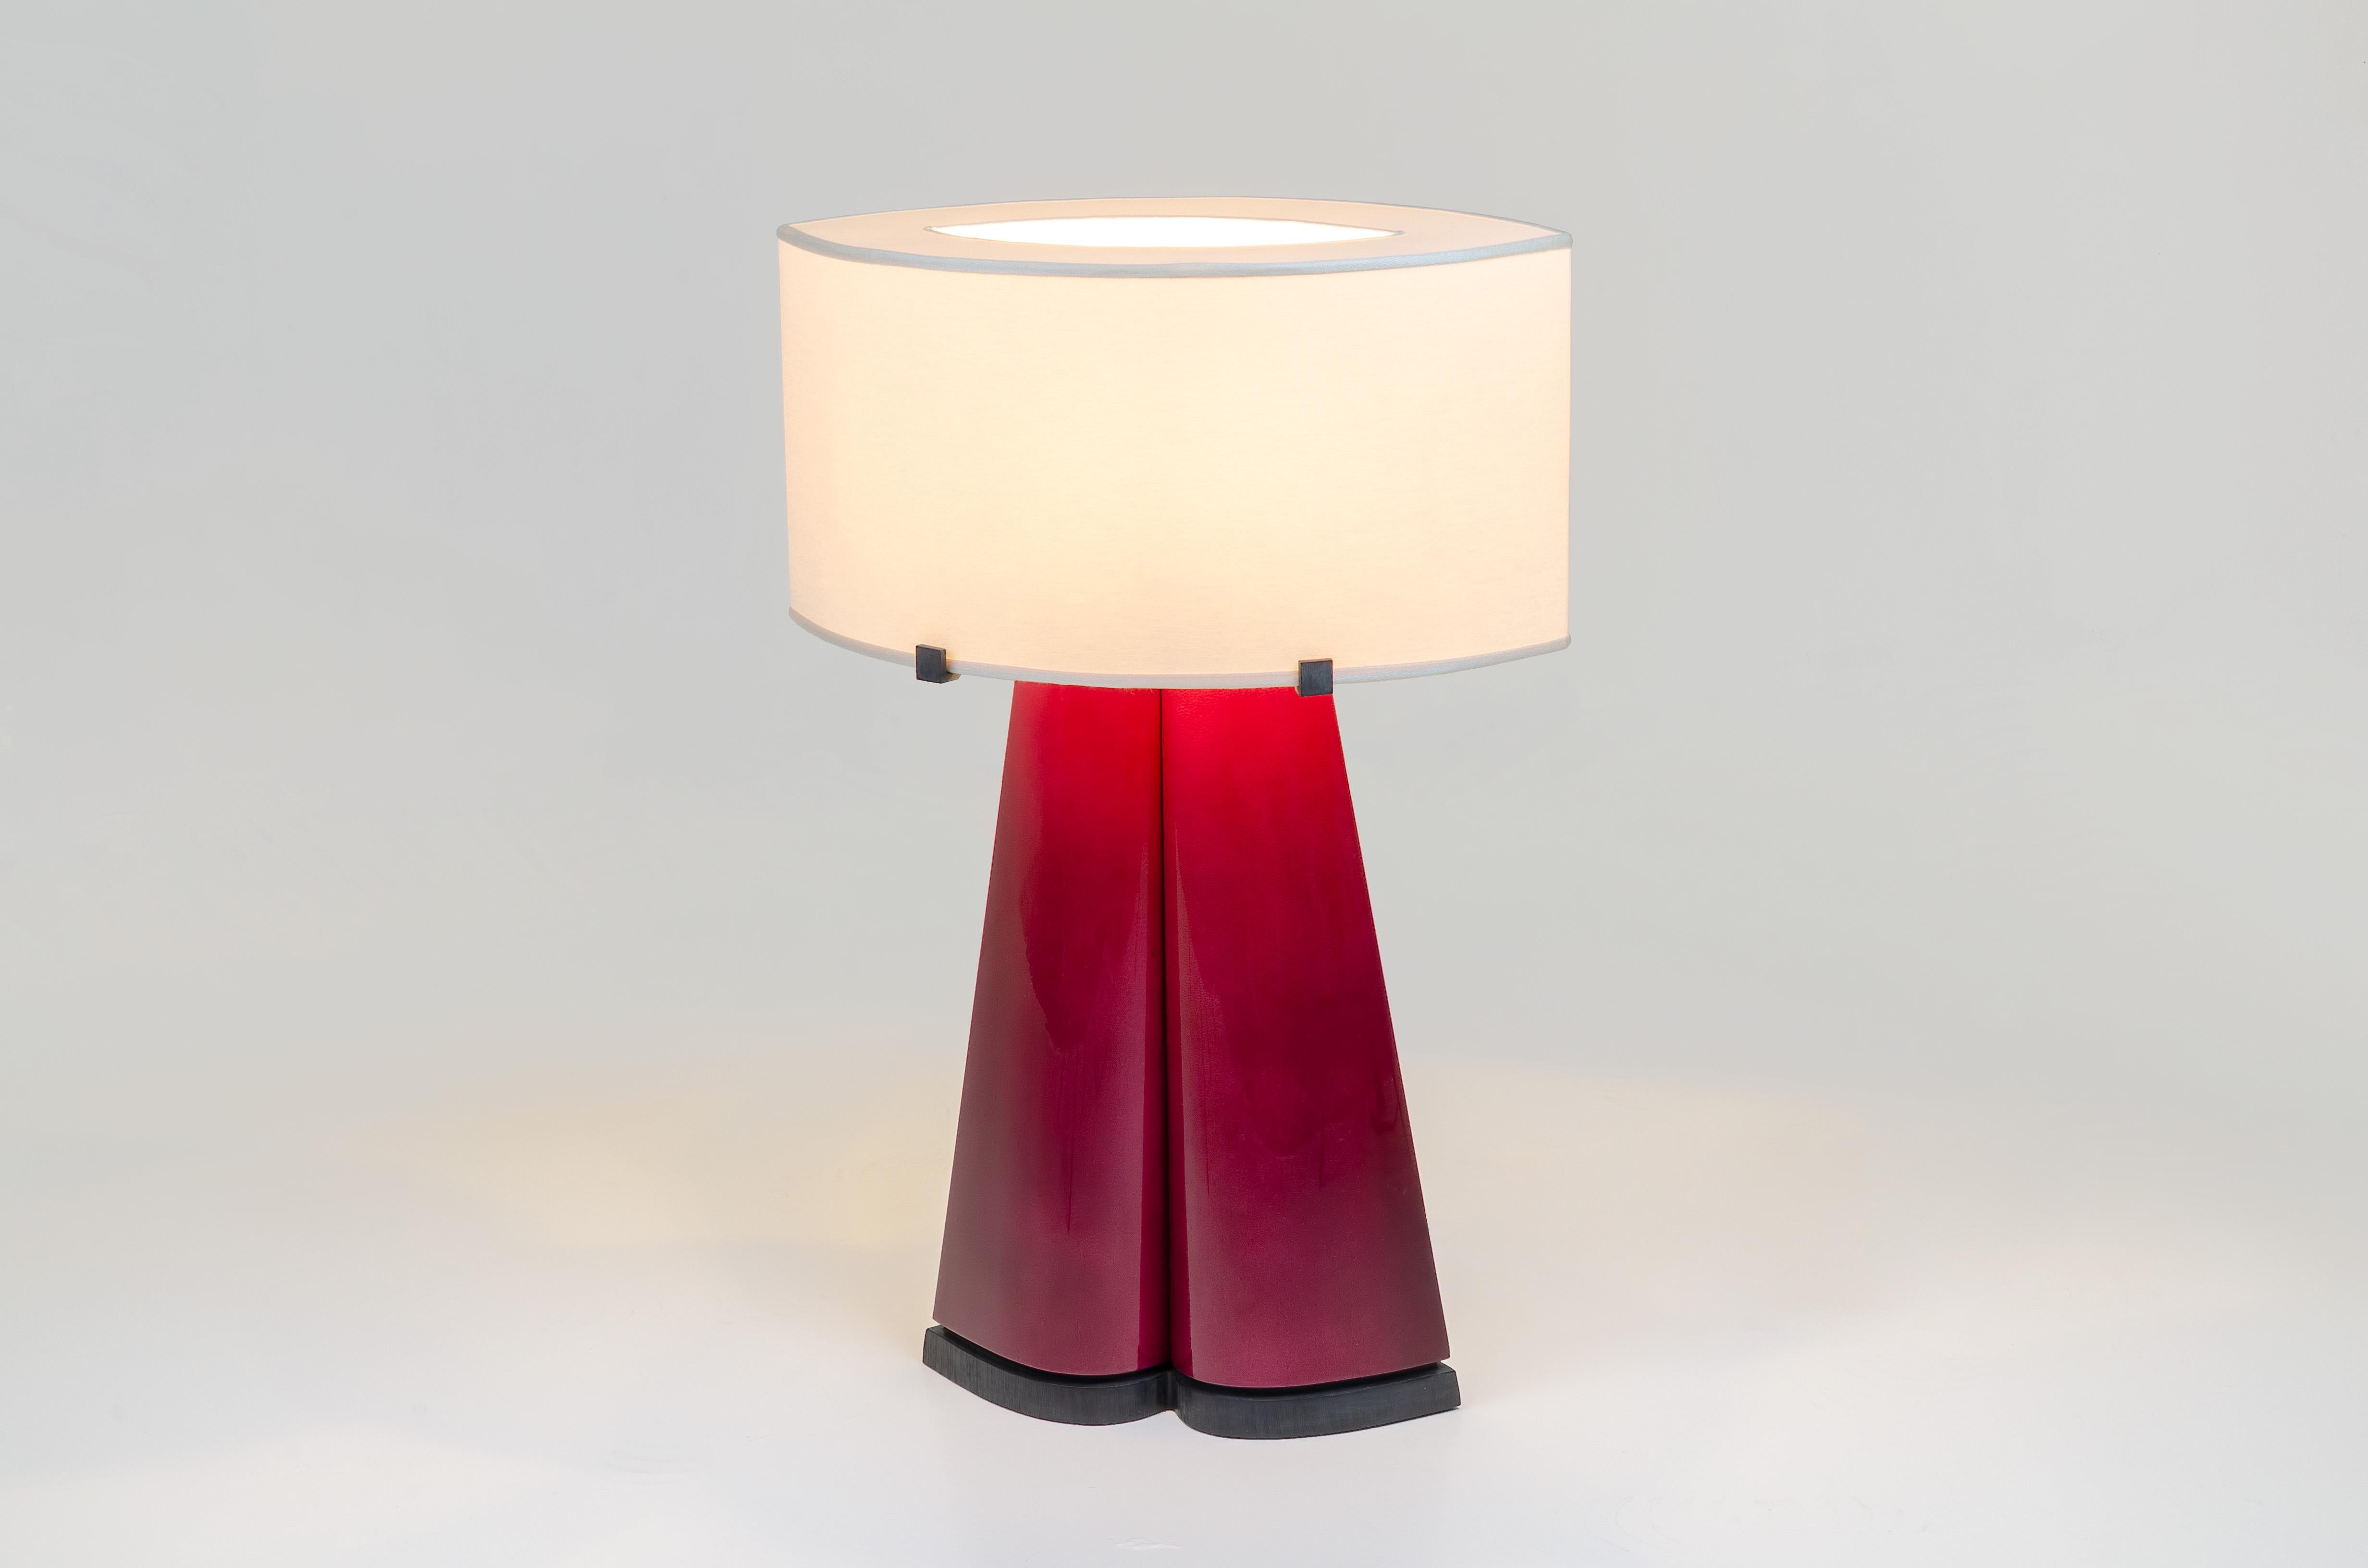 Achille Salvagni
Sotirio red
2019

This triangular table lamp made of burnished cast bronze is complimented by a handmade organic silk Shade. The body is finished in a rich red lacquered parchment which beautifully contrasts the softness of the